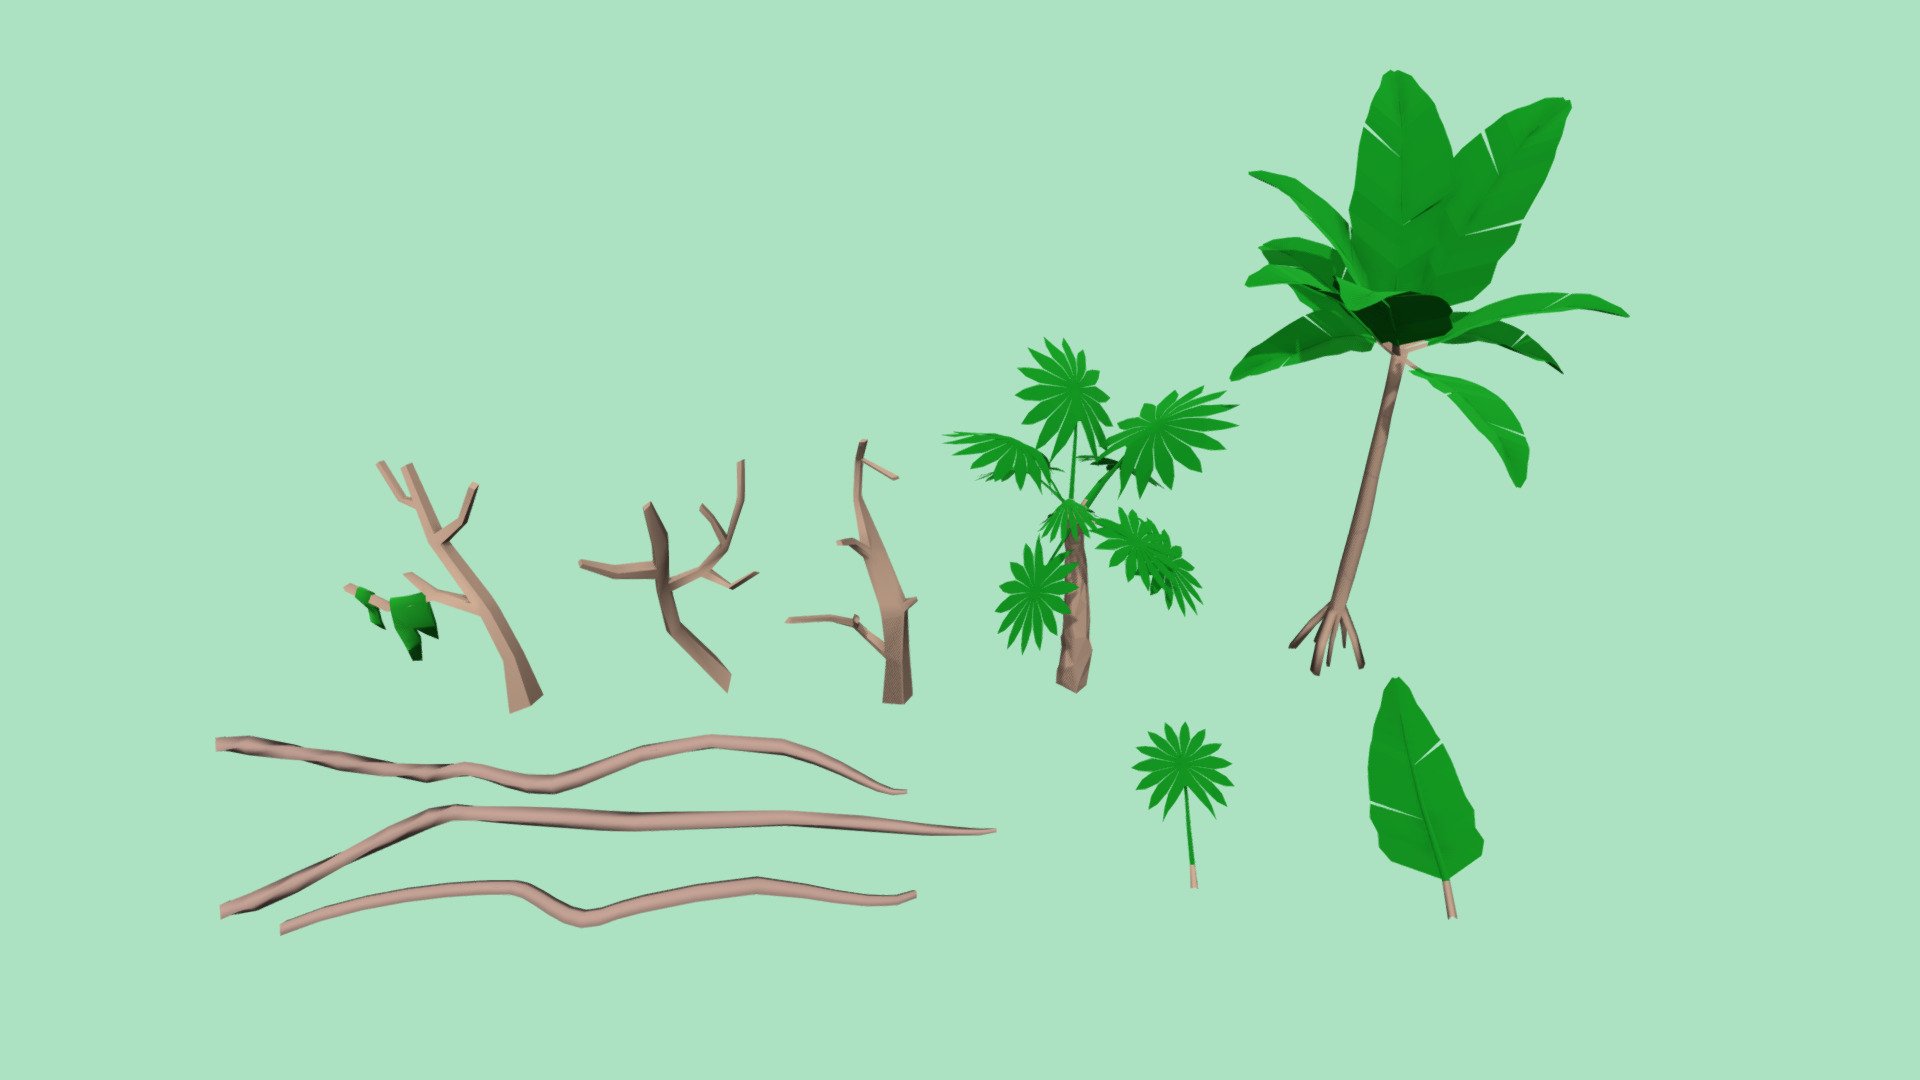 Add variety to any cartoon or low poly jungle scene with these dead branches and vines, as well as two palm trees. These models are part of my Poly Jungle package in the Unity Asset Store 3d model